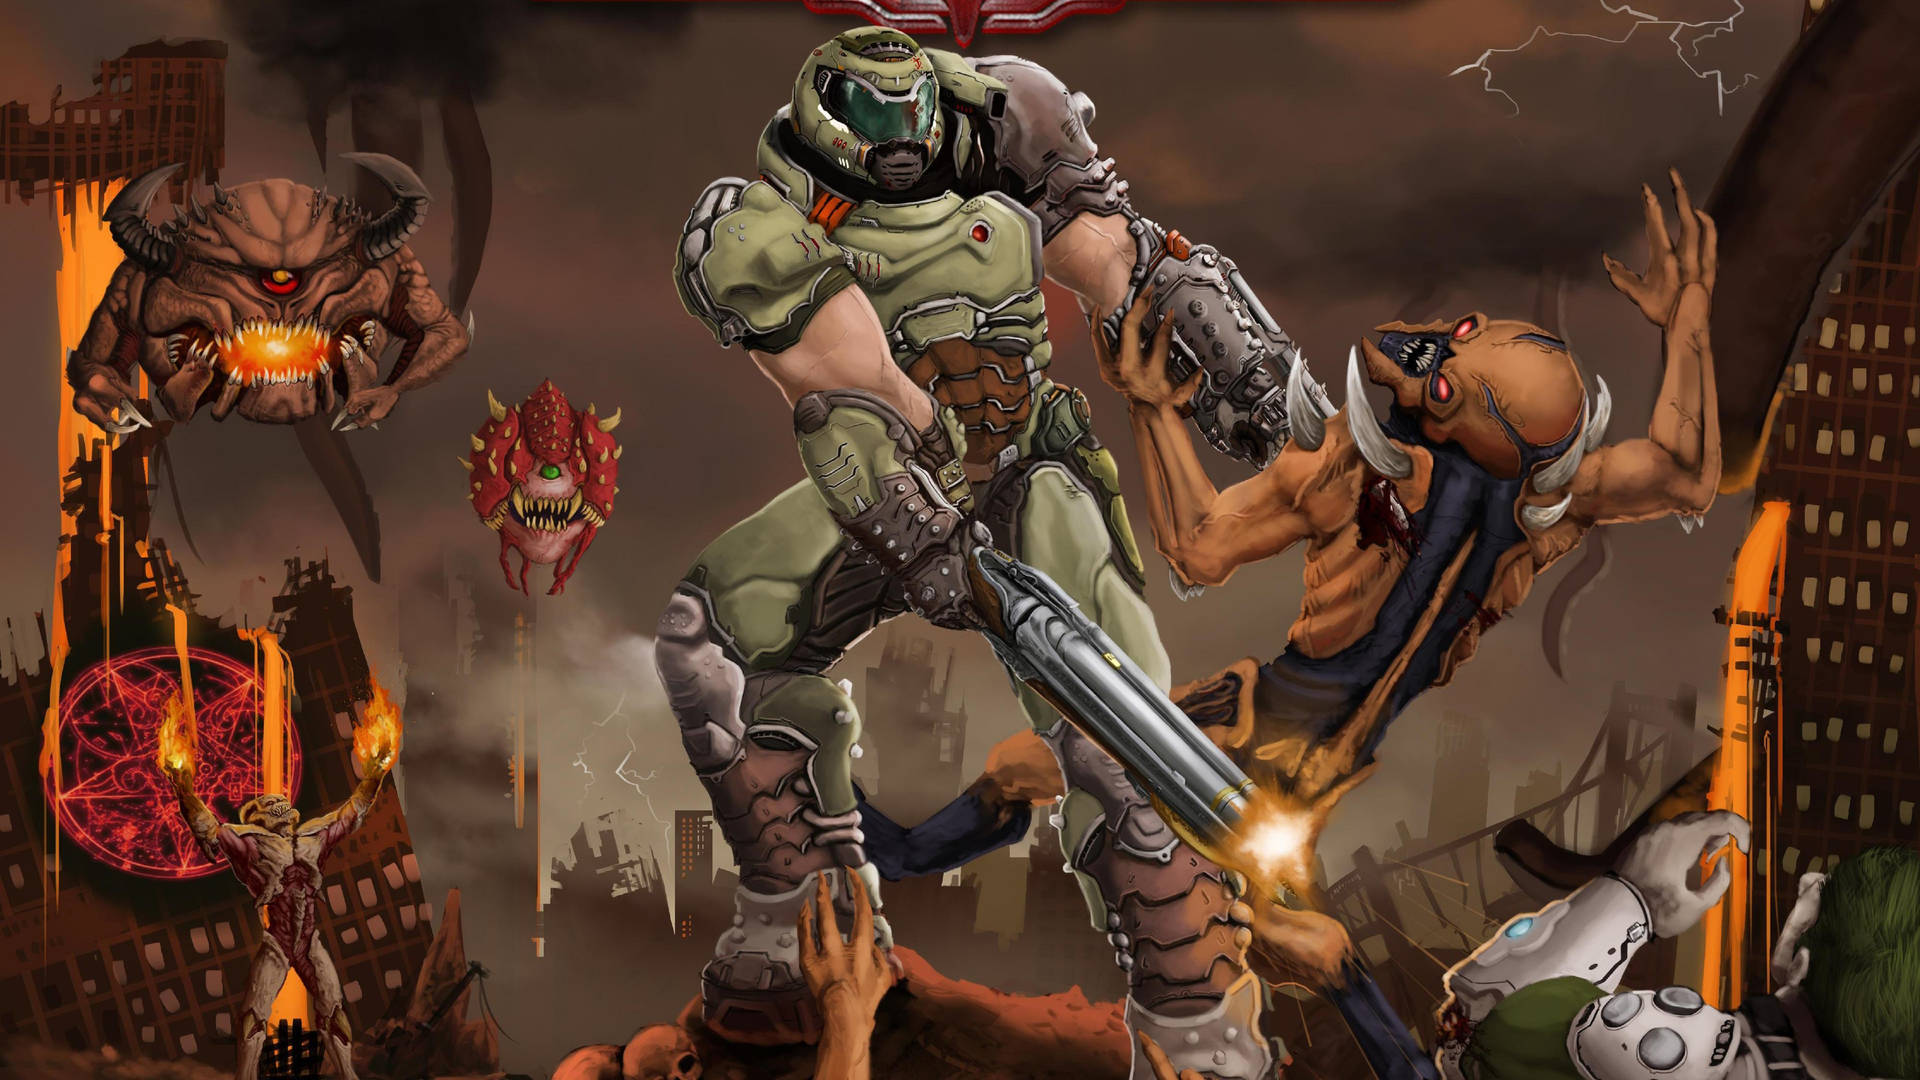 Doomguy in Action - Classic Video Game Cover Art Wallpaper